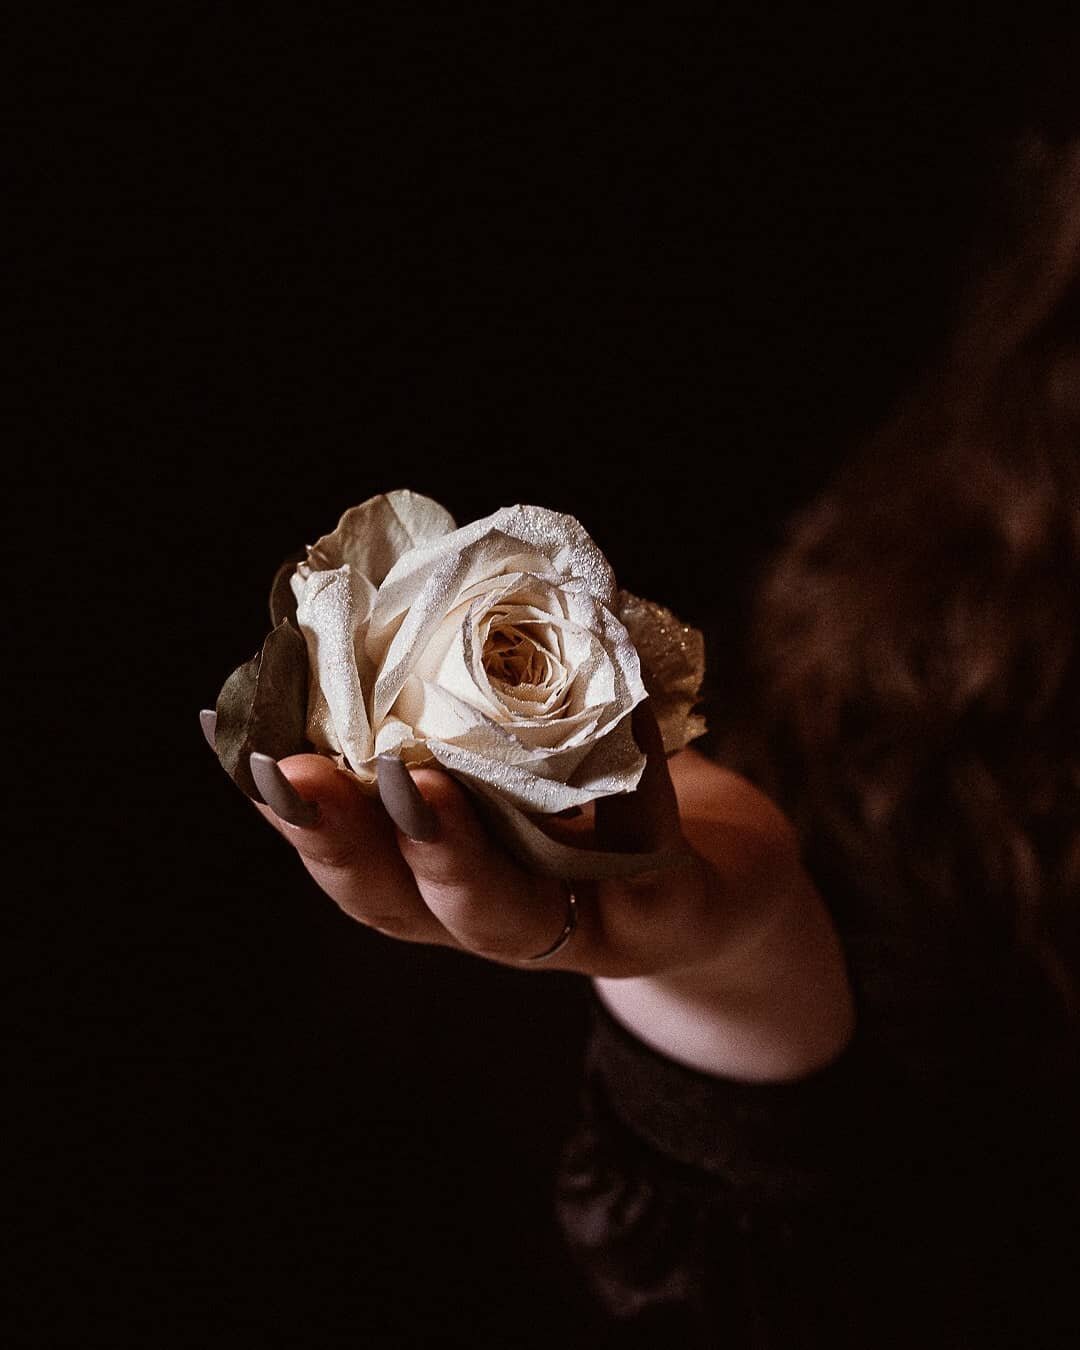 We wouldn't ask why a rose that grew from the concrete had damaged petals. On the contrary, we would all celebrate its tenacity... Well, we are the rose, this is the concrete, and these are my damaged petals. Don't ask me why... ask me how.
&mdash; T